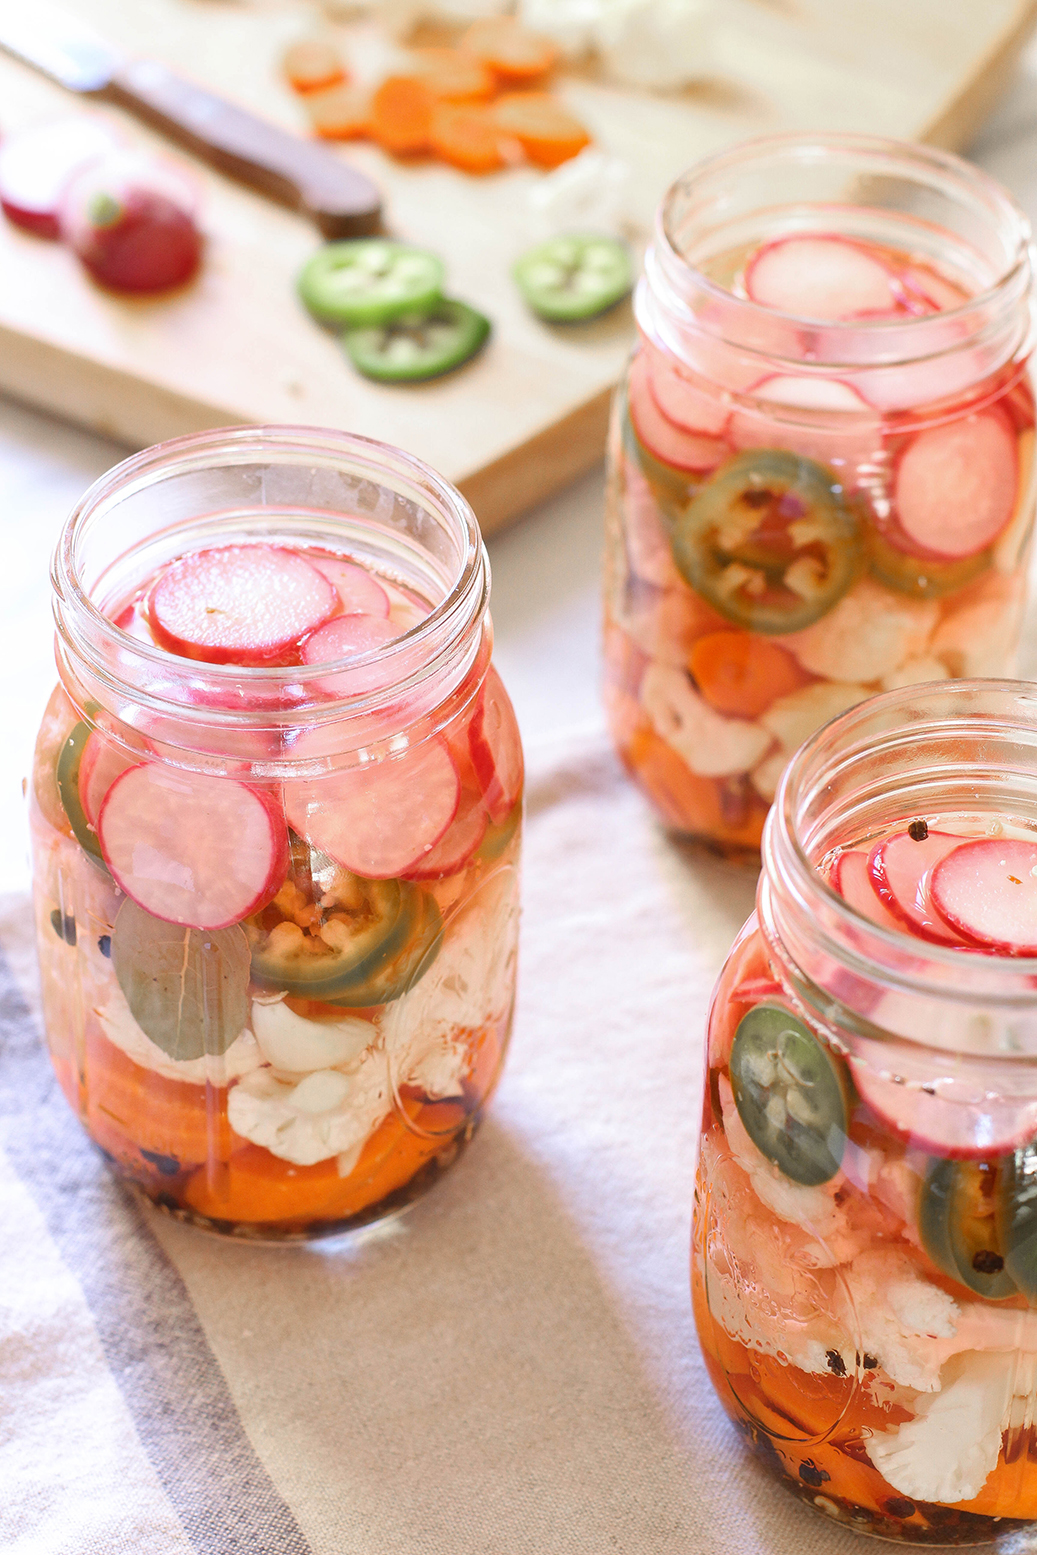 Classic Escabeche – Mexican pickled vegetables | The Mostly Vegan